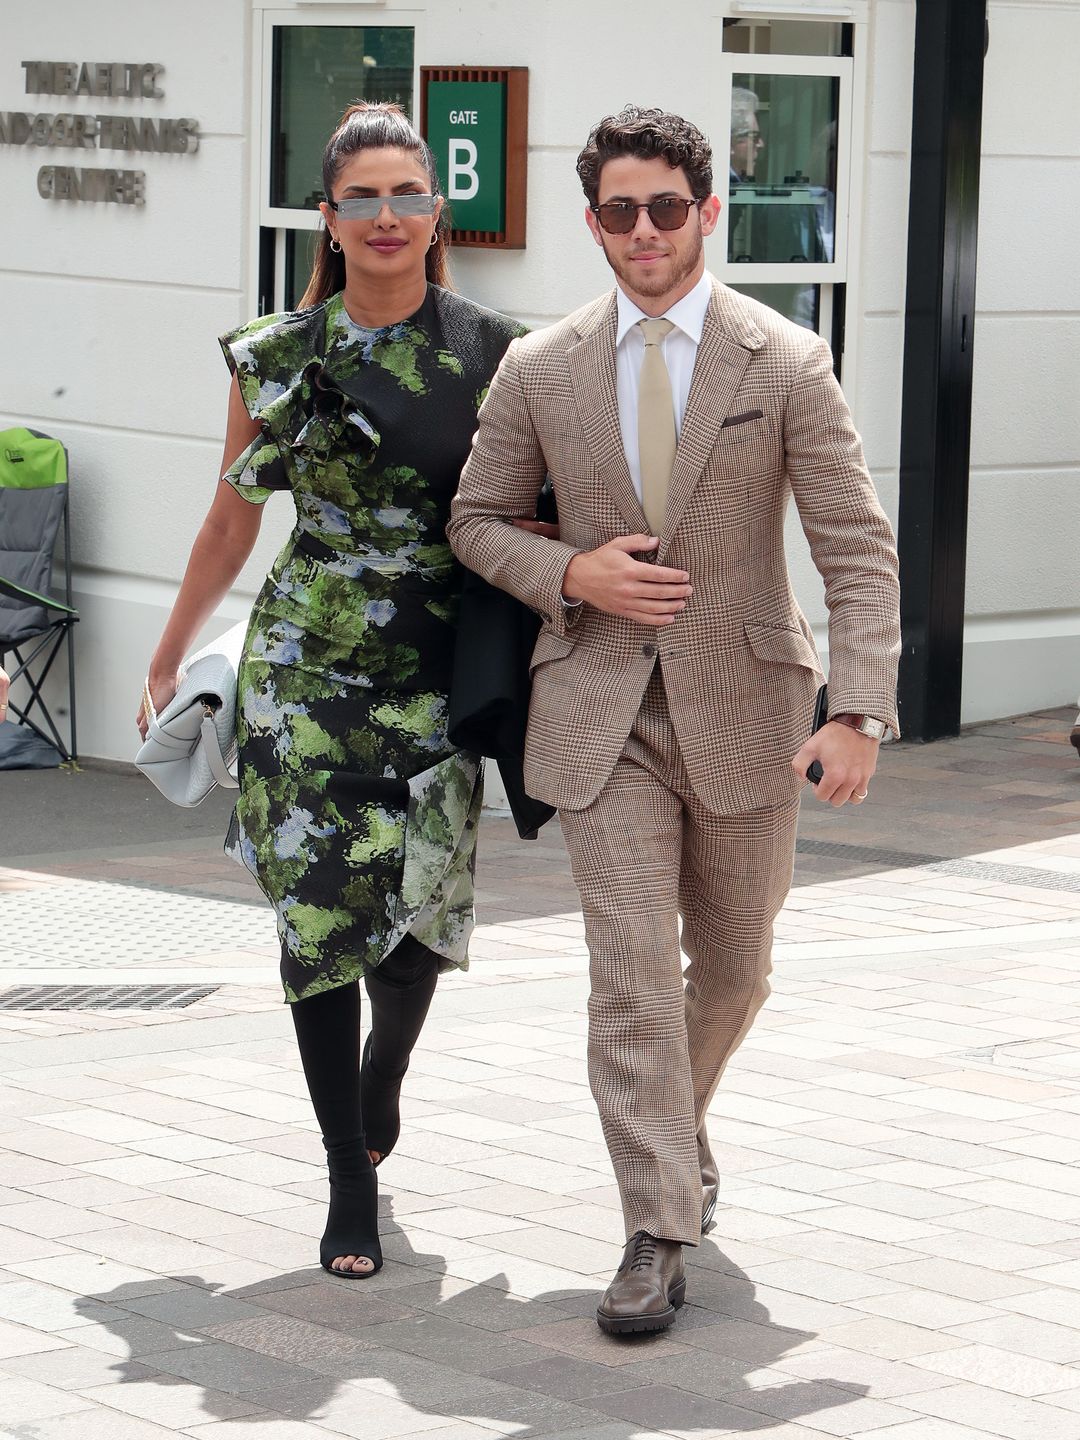 LONDON, ENGLAND - JULY 15: Priyanka Chopra Jonas and Nick Jonas attend day thirteen of the Wimbledon Tennis Championships at All England Lawn Tennis and Croquet Club on July 15, 2023 in London, England. (Photo by Neil Mockford/GC Images)